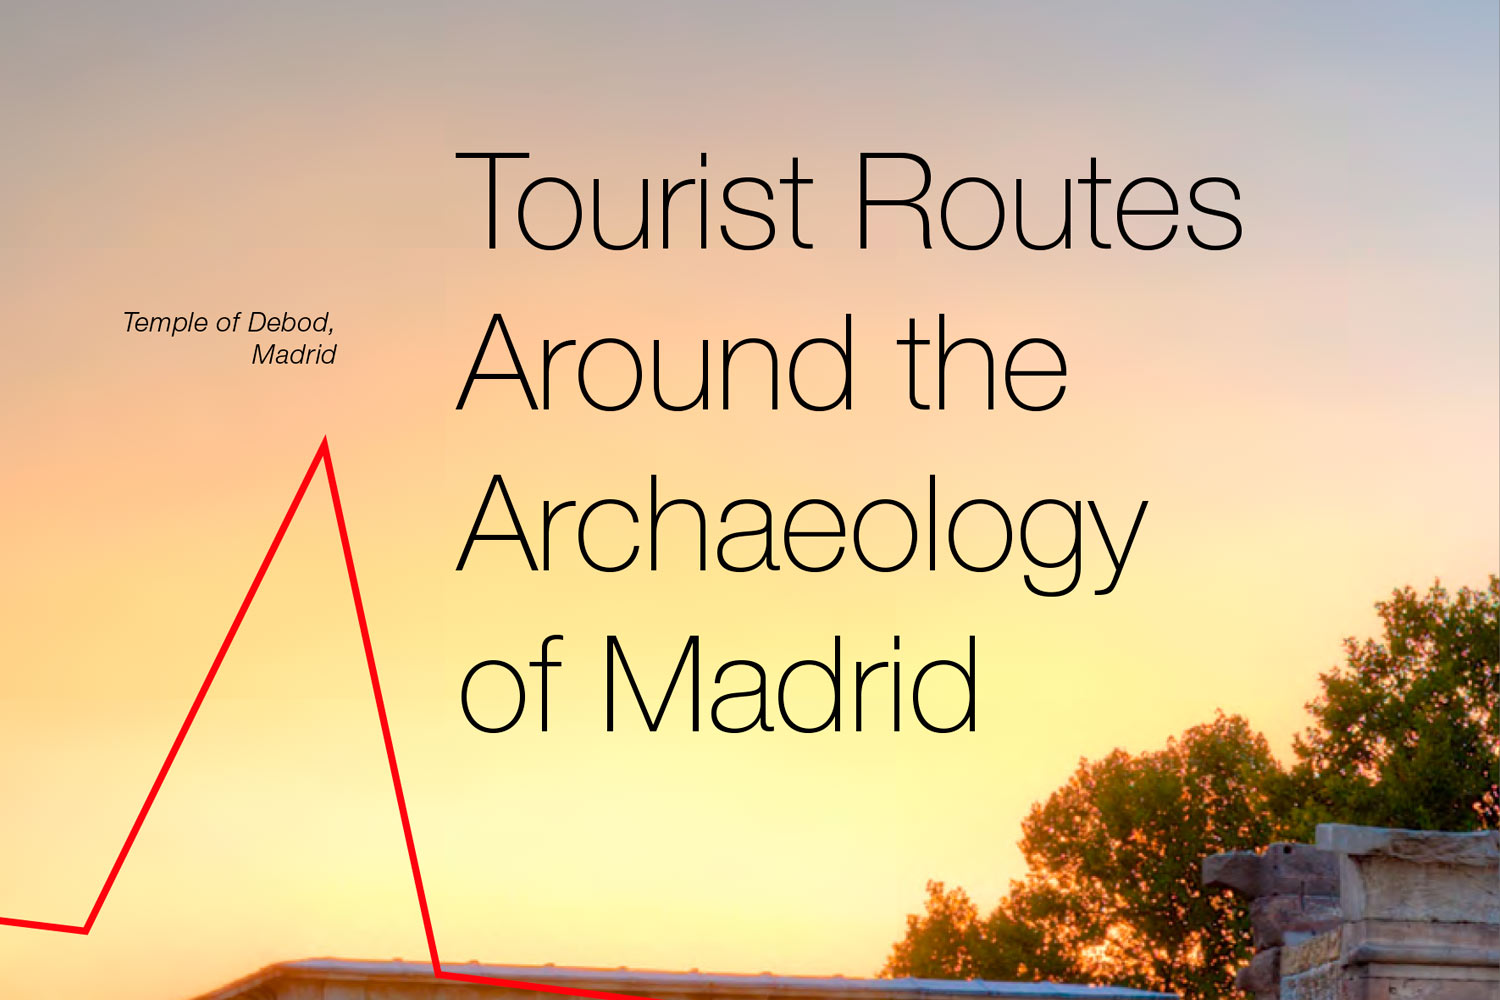 Tourist Routes Around the Archaeology of Madrid